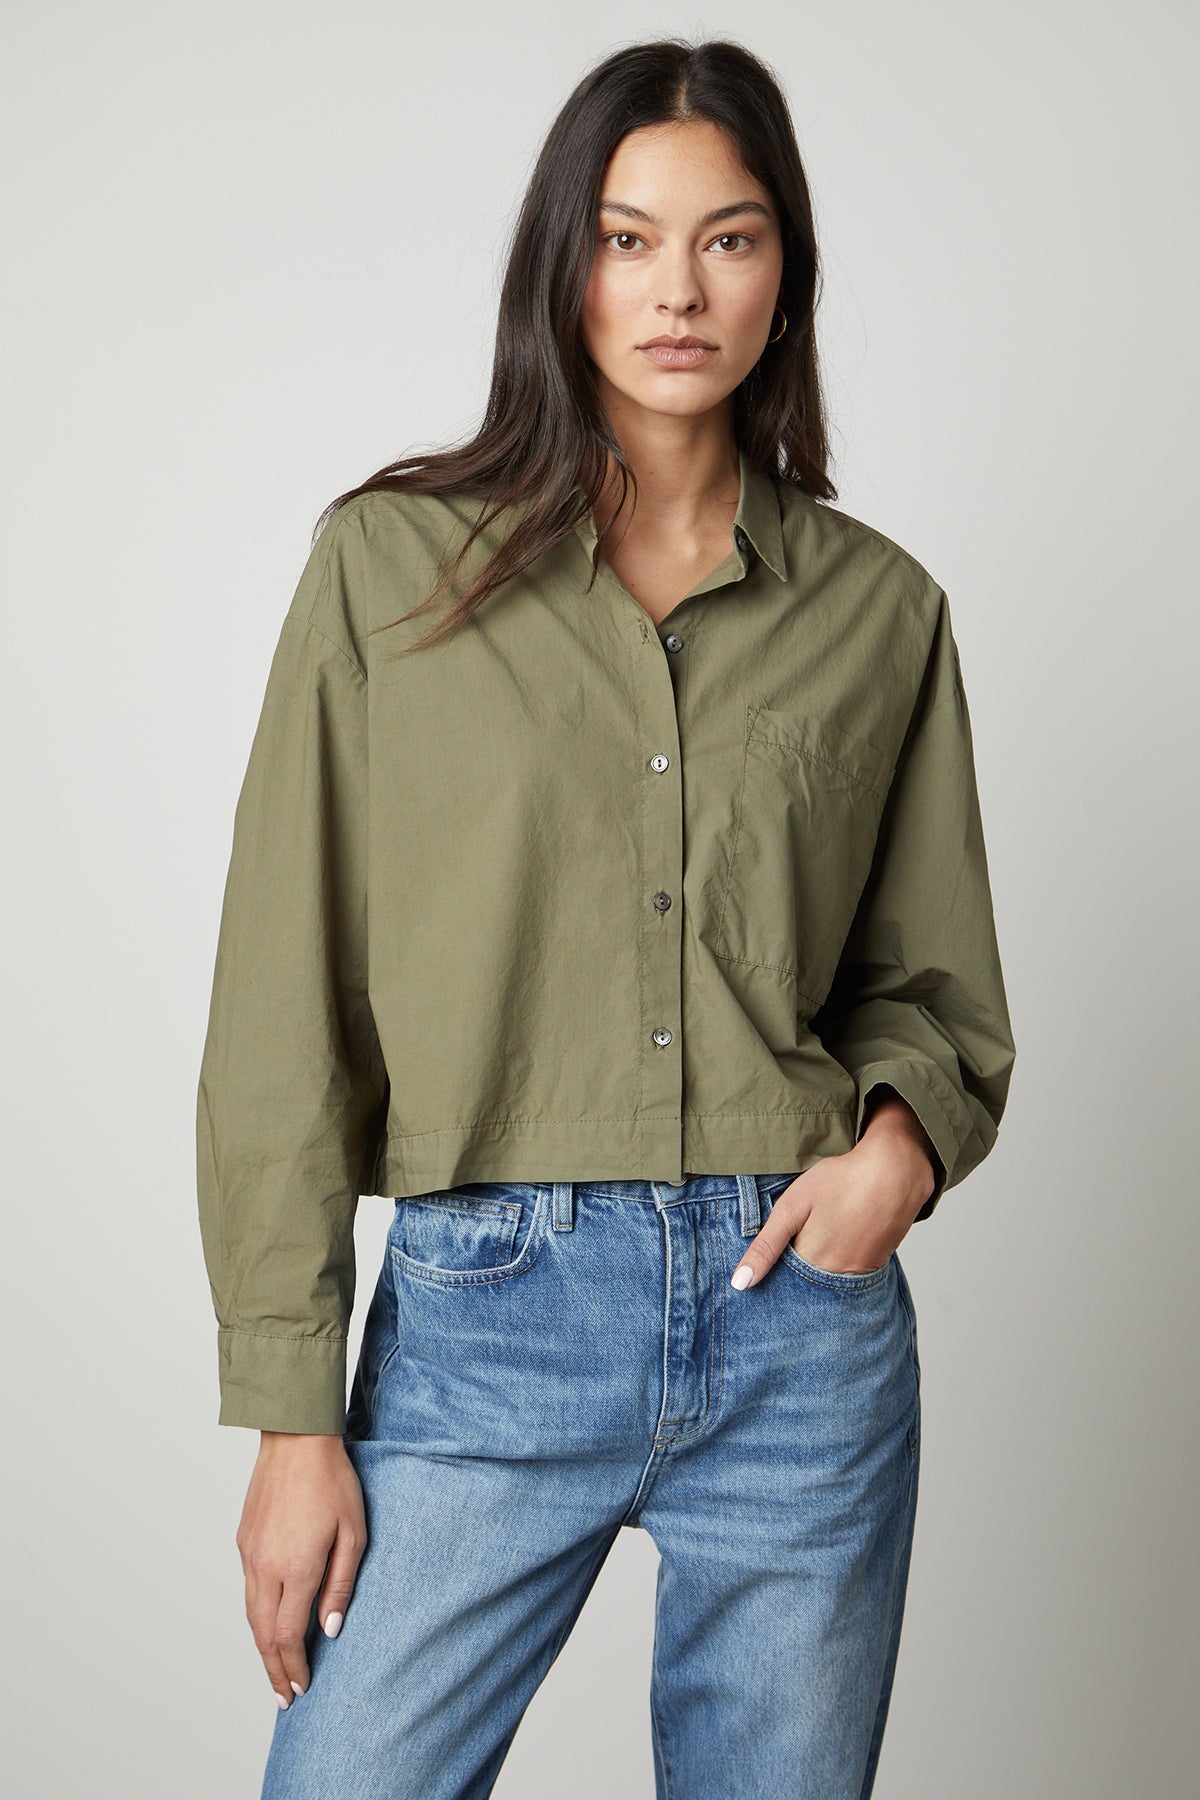 The LUCILLE CROPPED BUTTON-UP SHIRT in olive green by Velvet by Graham & Spencer.-26799854485697